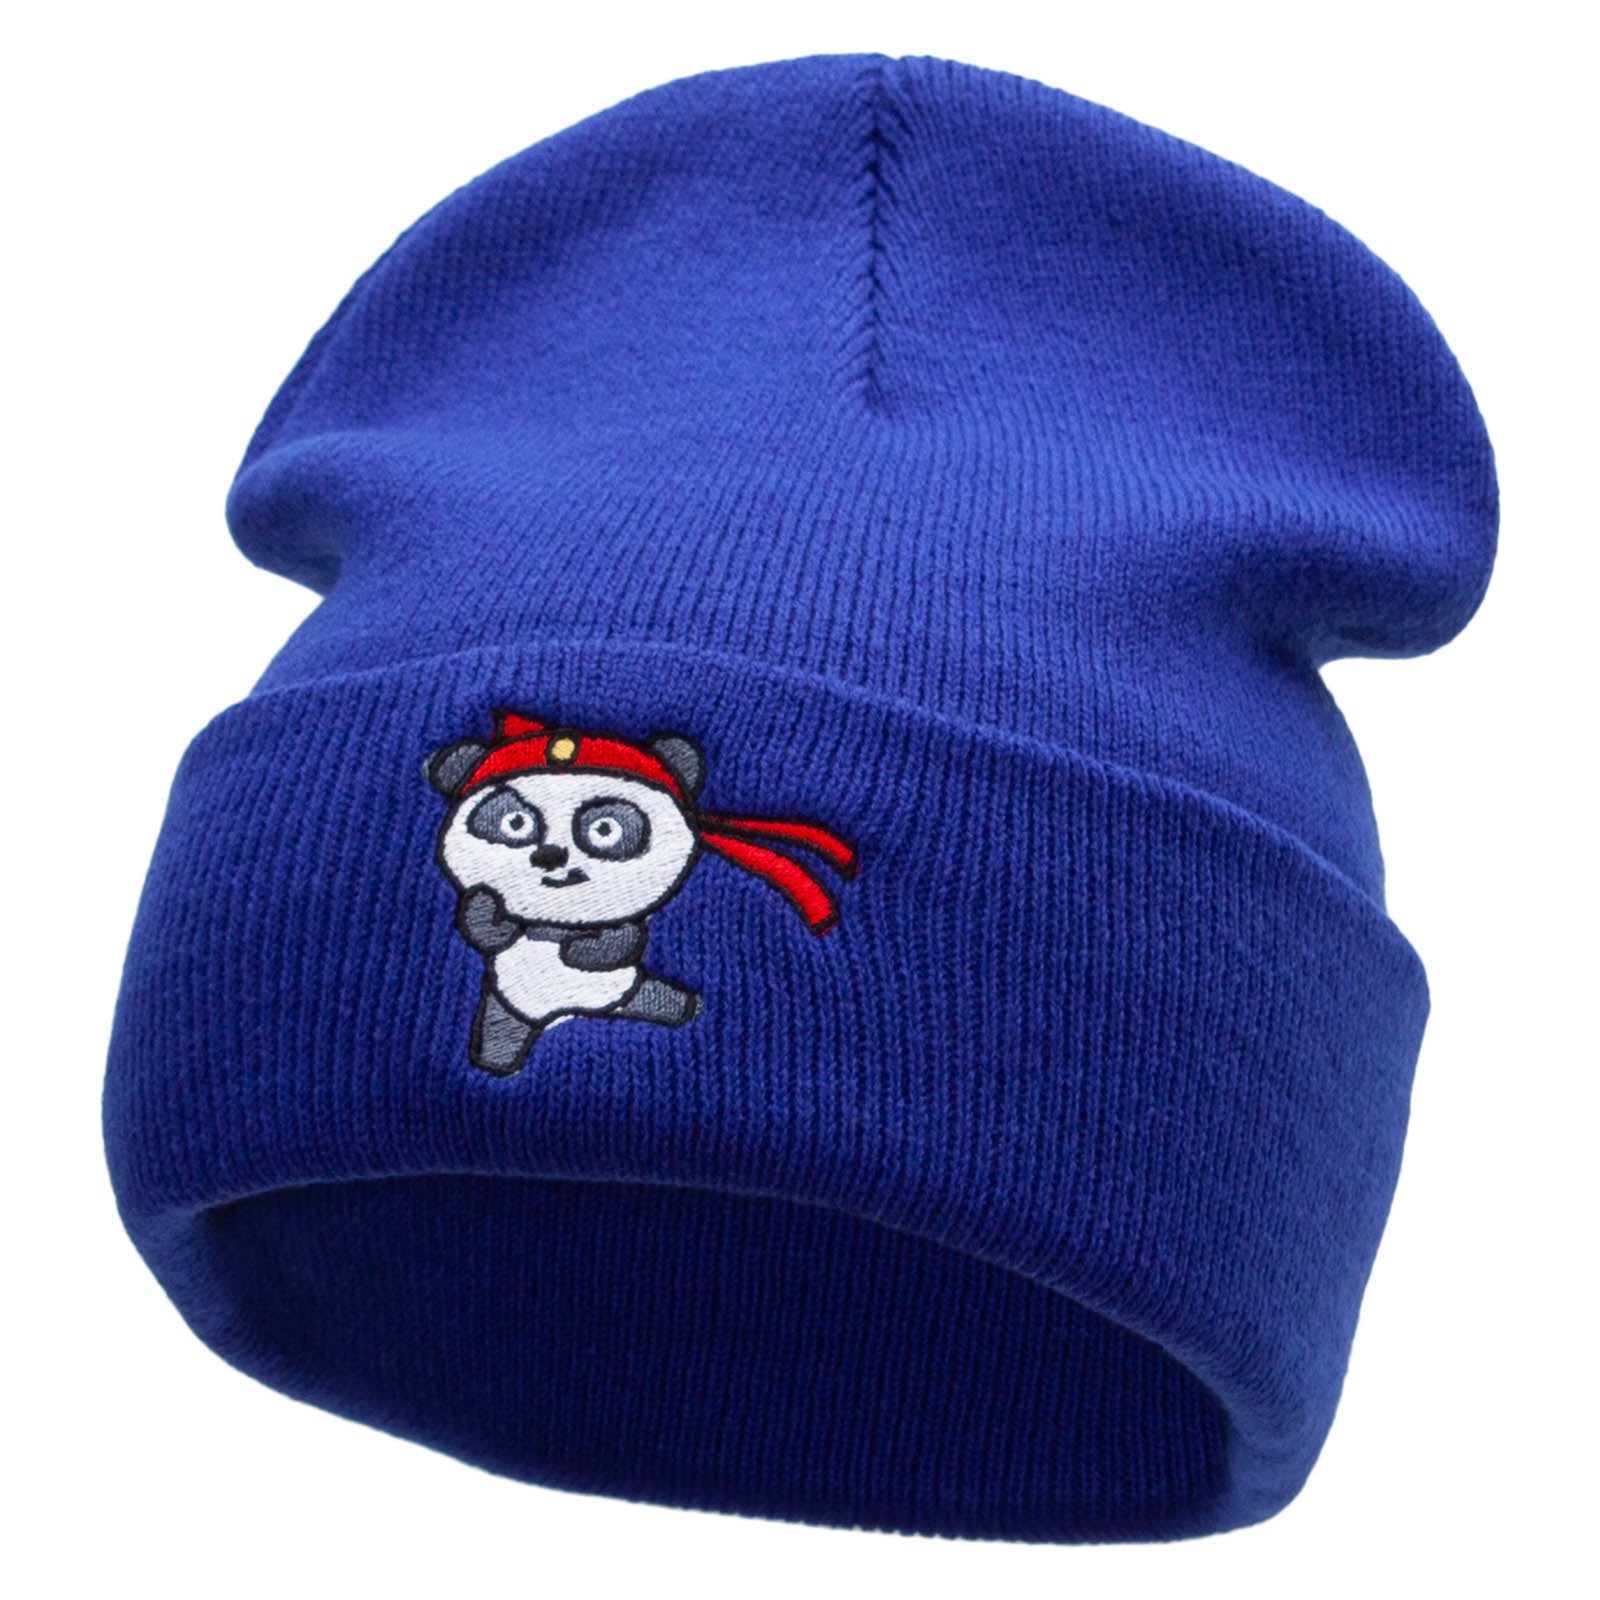 Karate Panda Embroidered 12 Inch Long Knitted Beanie - Royal OSFM